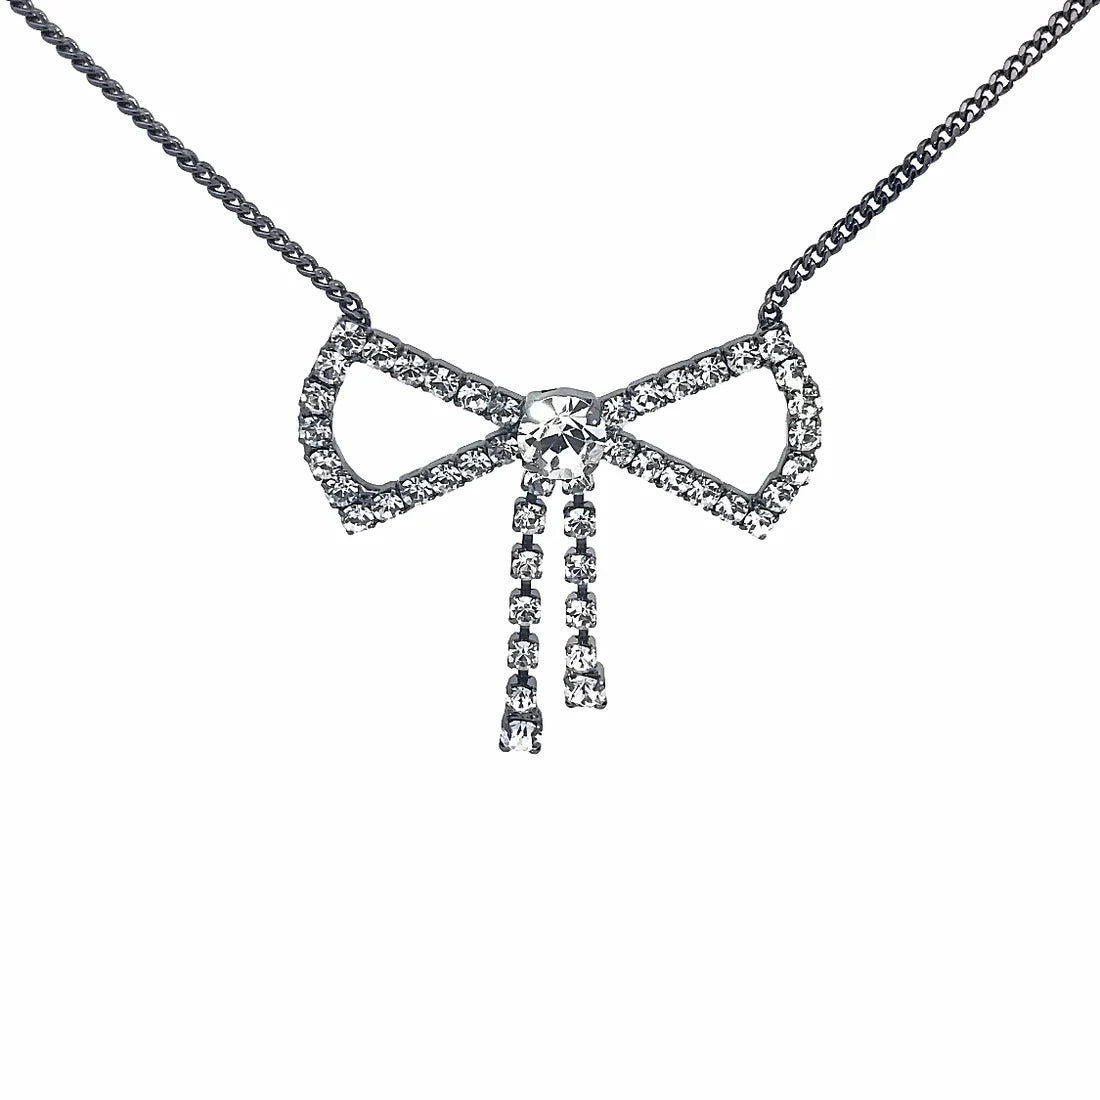 BIG BOW NECKLACE IN GUNMETAL